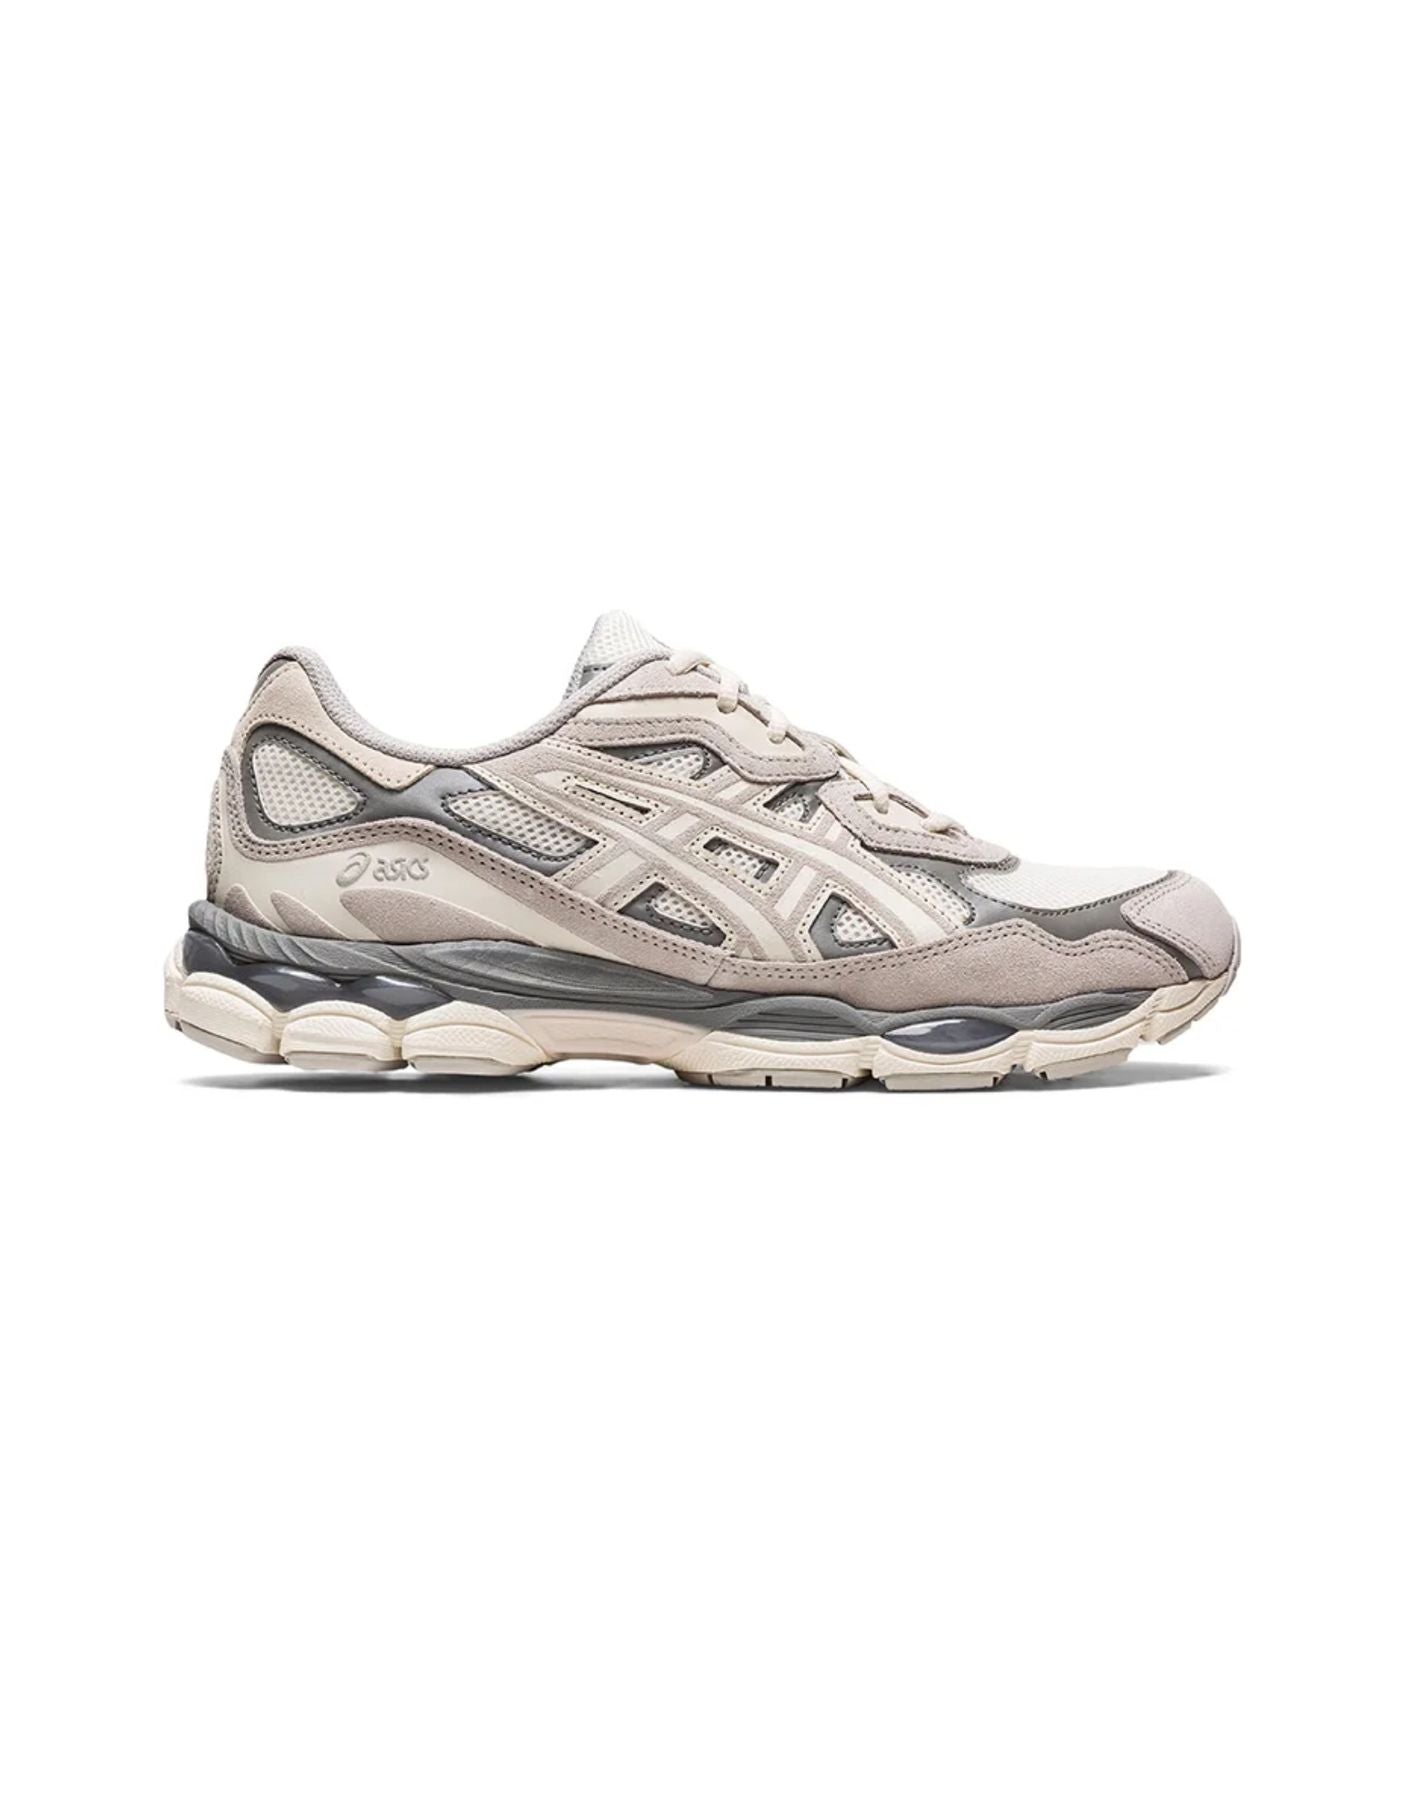 Chaussures pour femme Gel-NYC Cream / Oyster Grey W ASICS